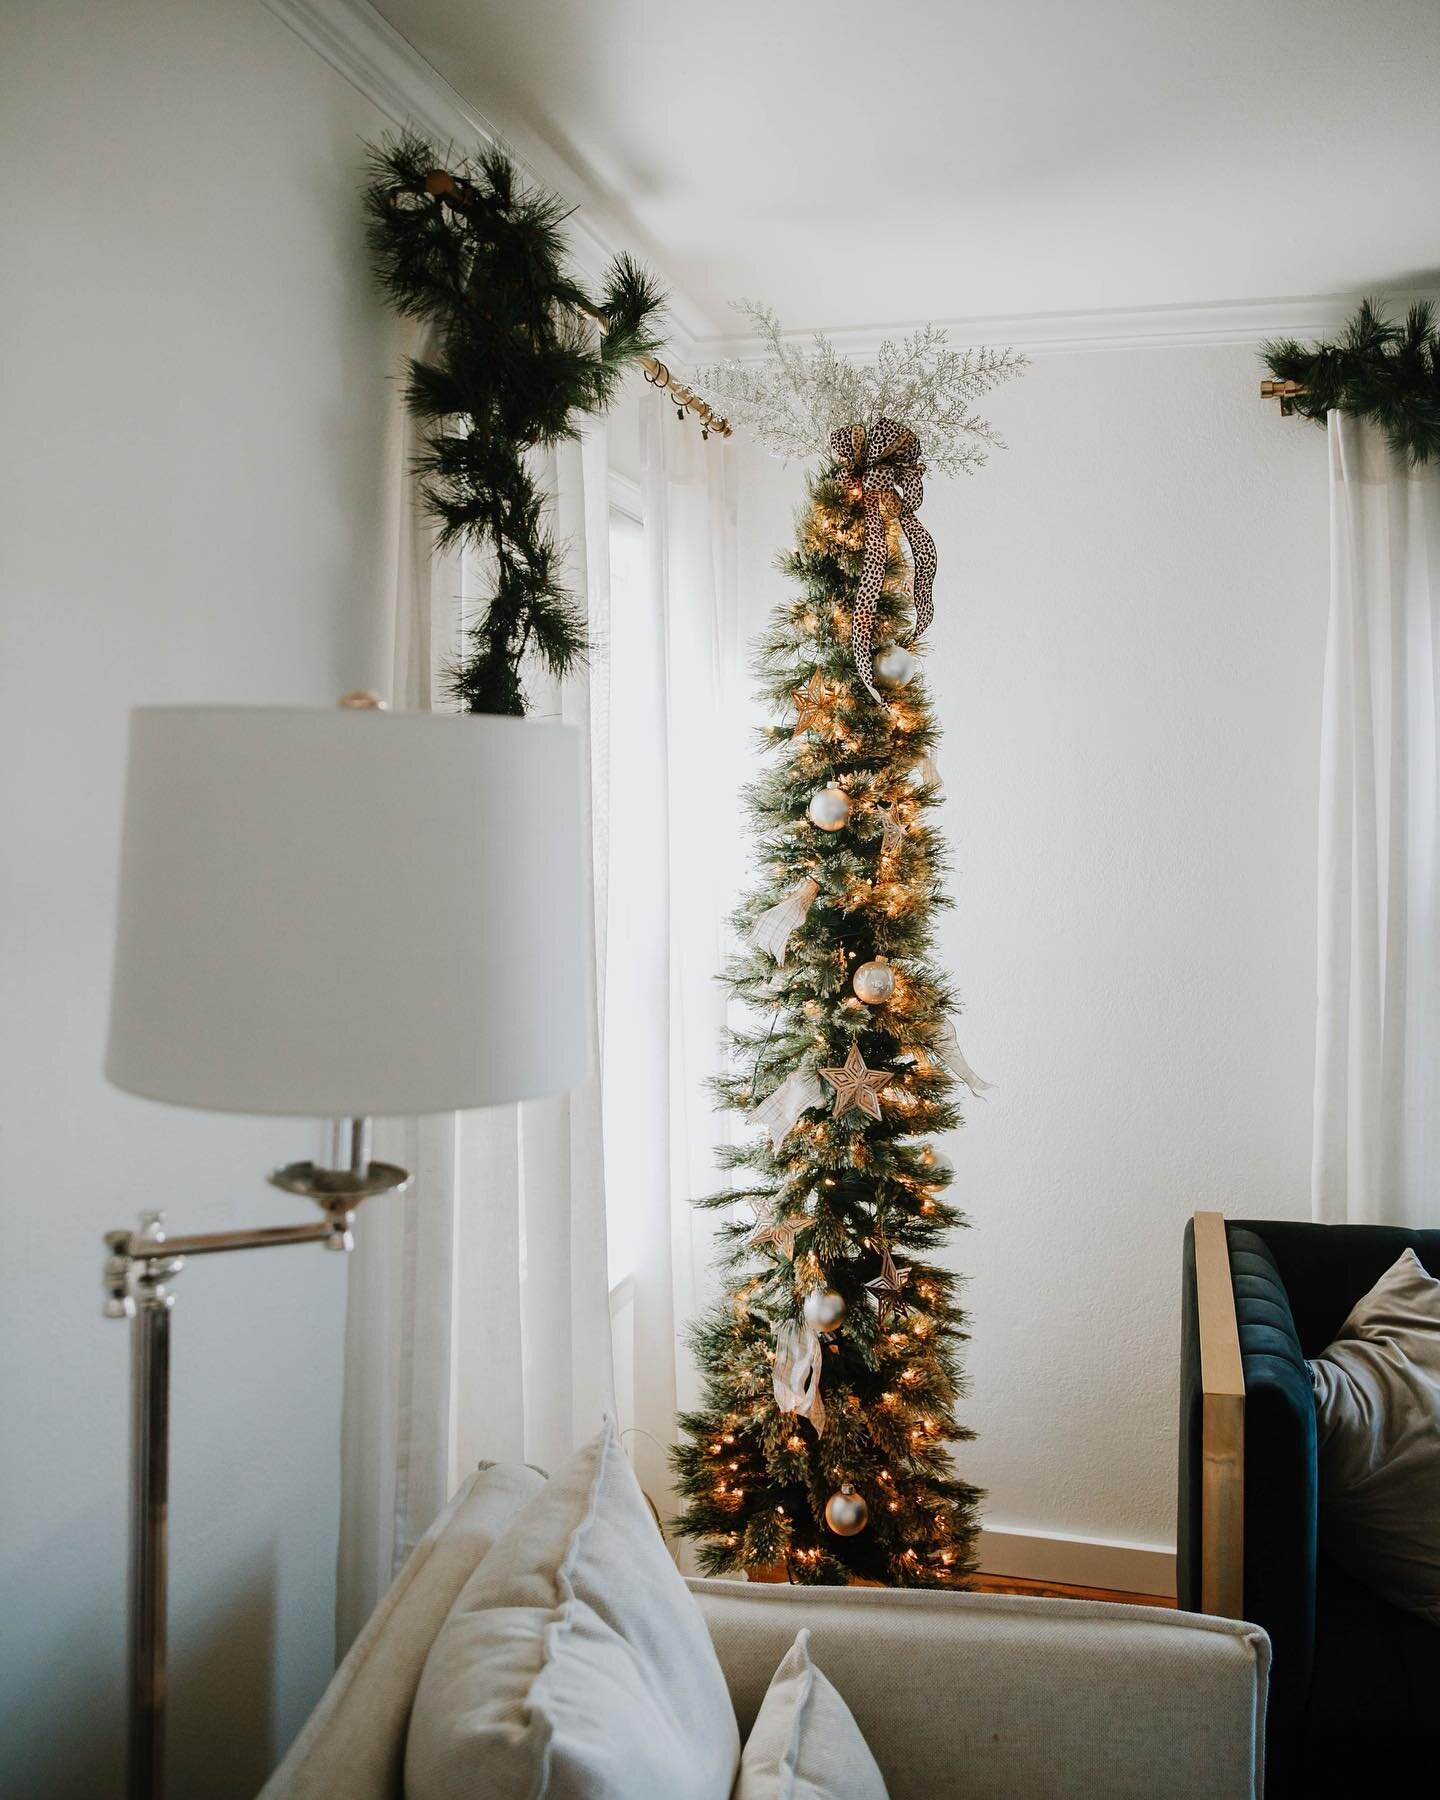 It's time to start planning! 🤍We are booking our Holiday Styling Services! 

From Christmas Trees, to Bannisters, Mantels, etc. 

We'll take the stress and the mess away so you can enjoy your holiday. For more info and pricing, DM us or comment Chri